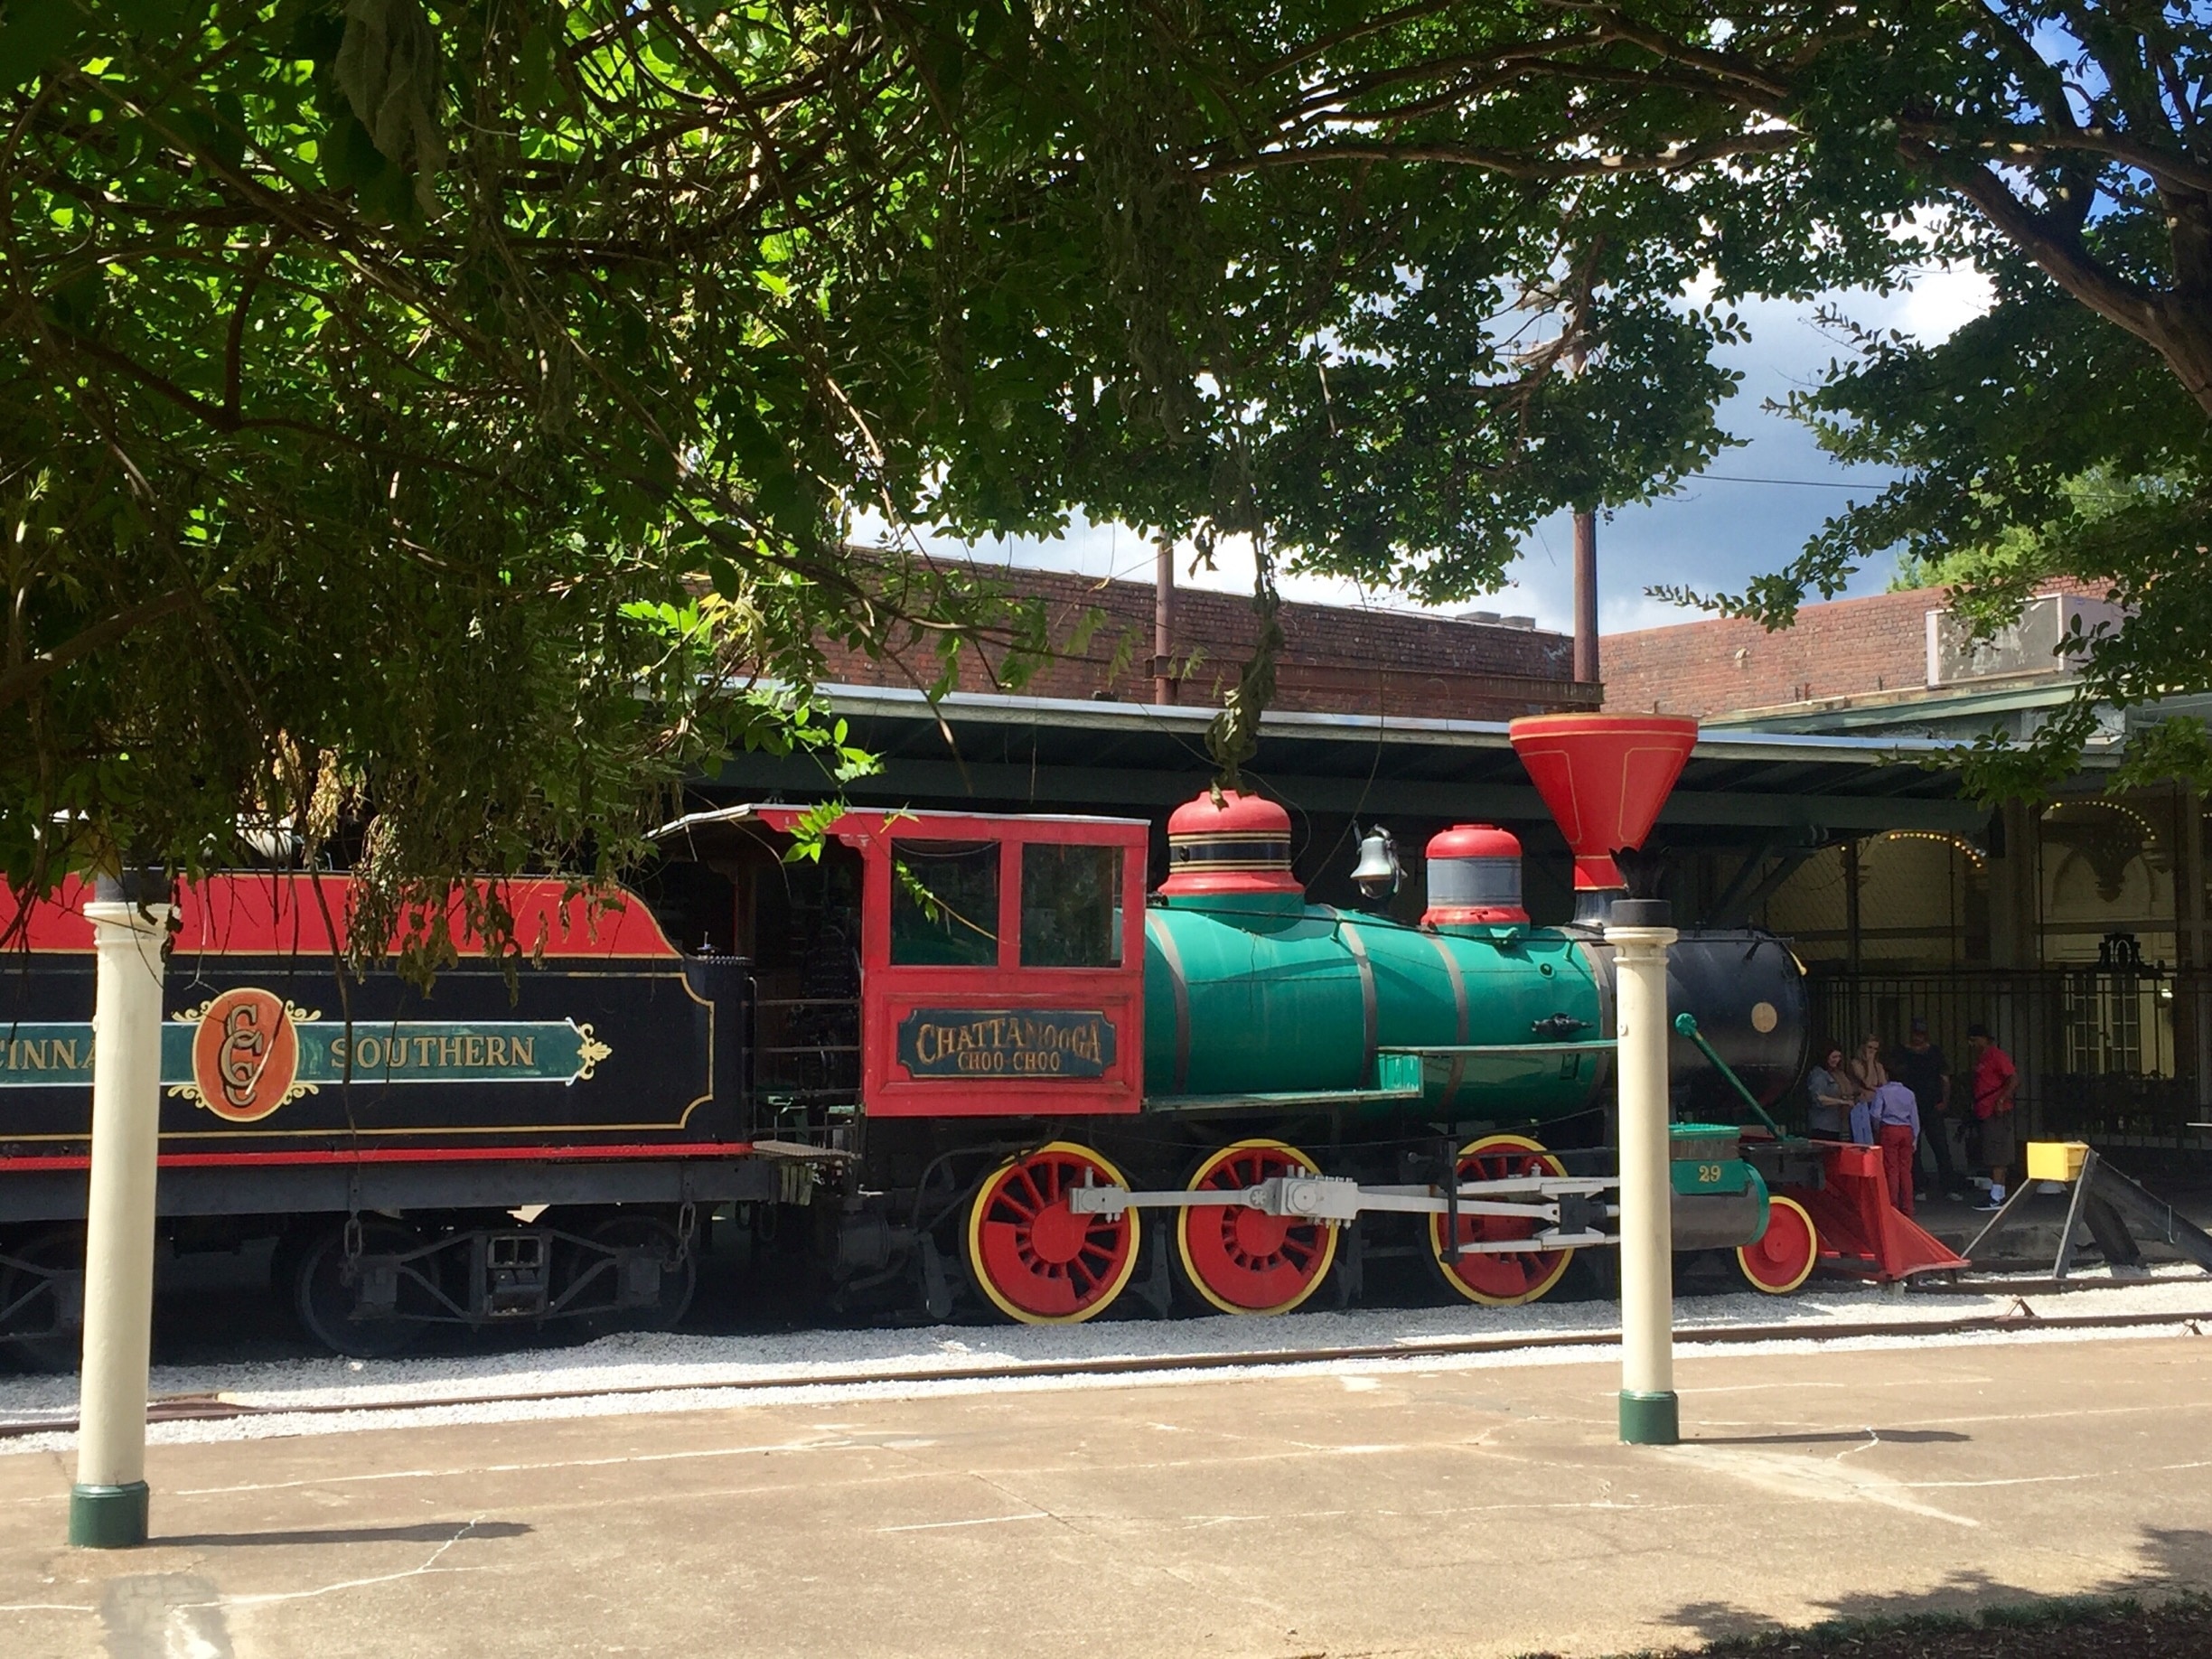 I recently passed through Chattanooga, Tennessee. I decided to visit the Choo Choo while there.